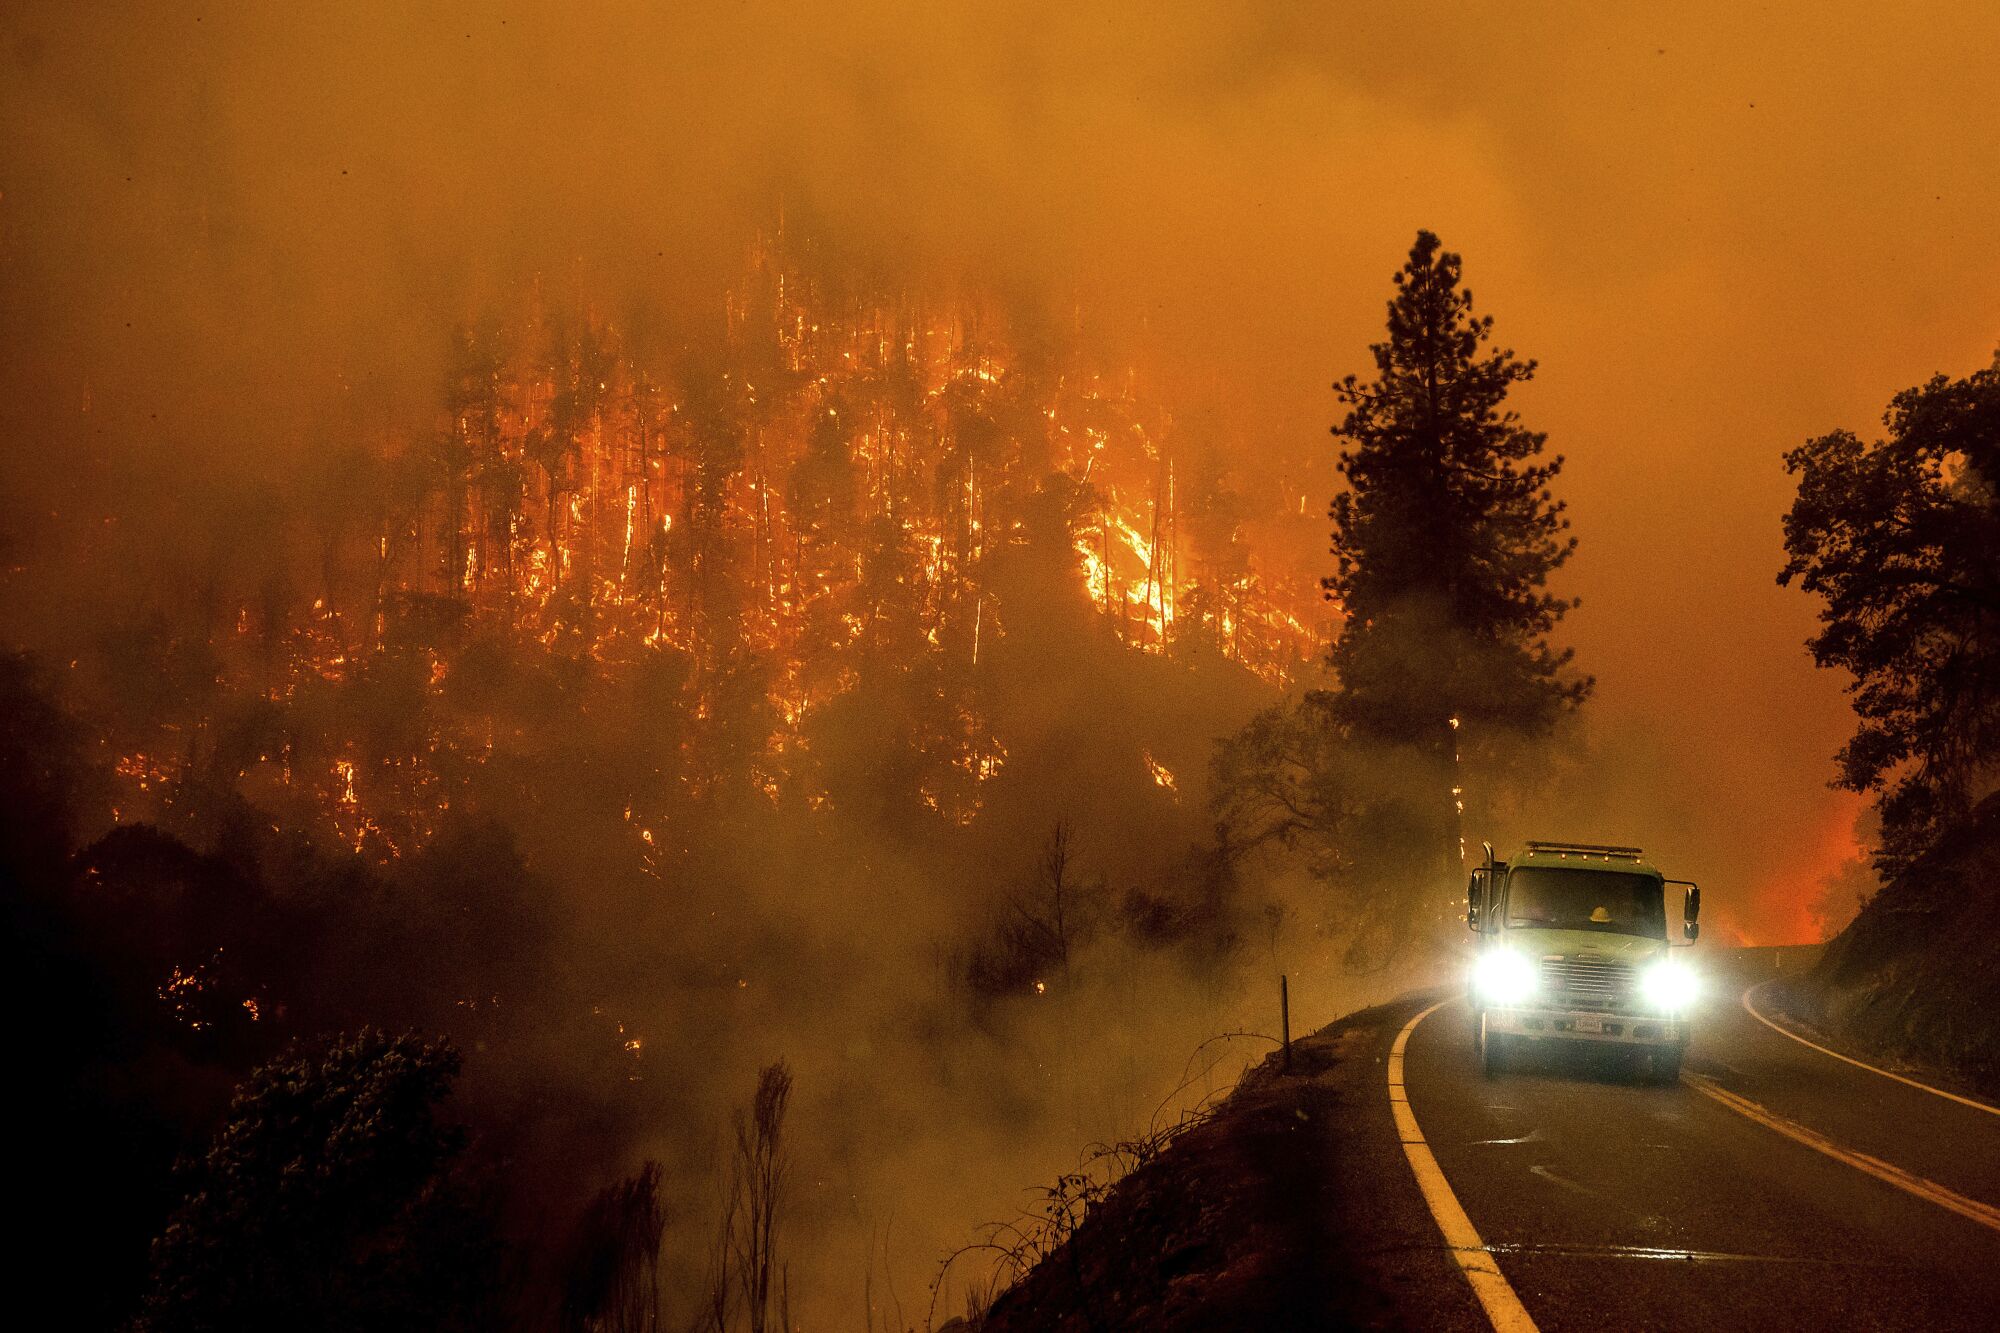 A firetruck on a highway with a forest burning in the background